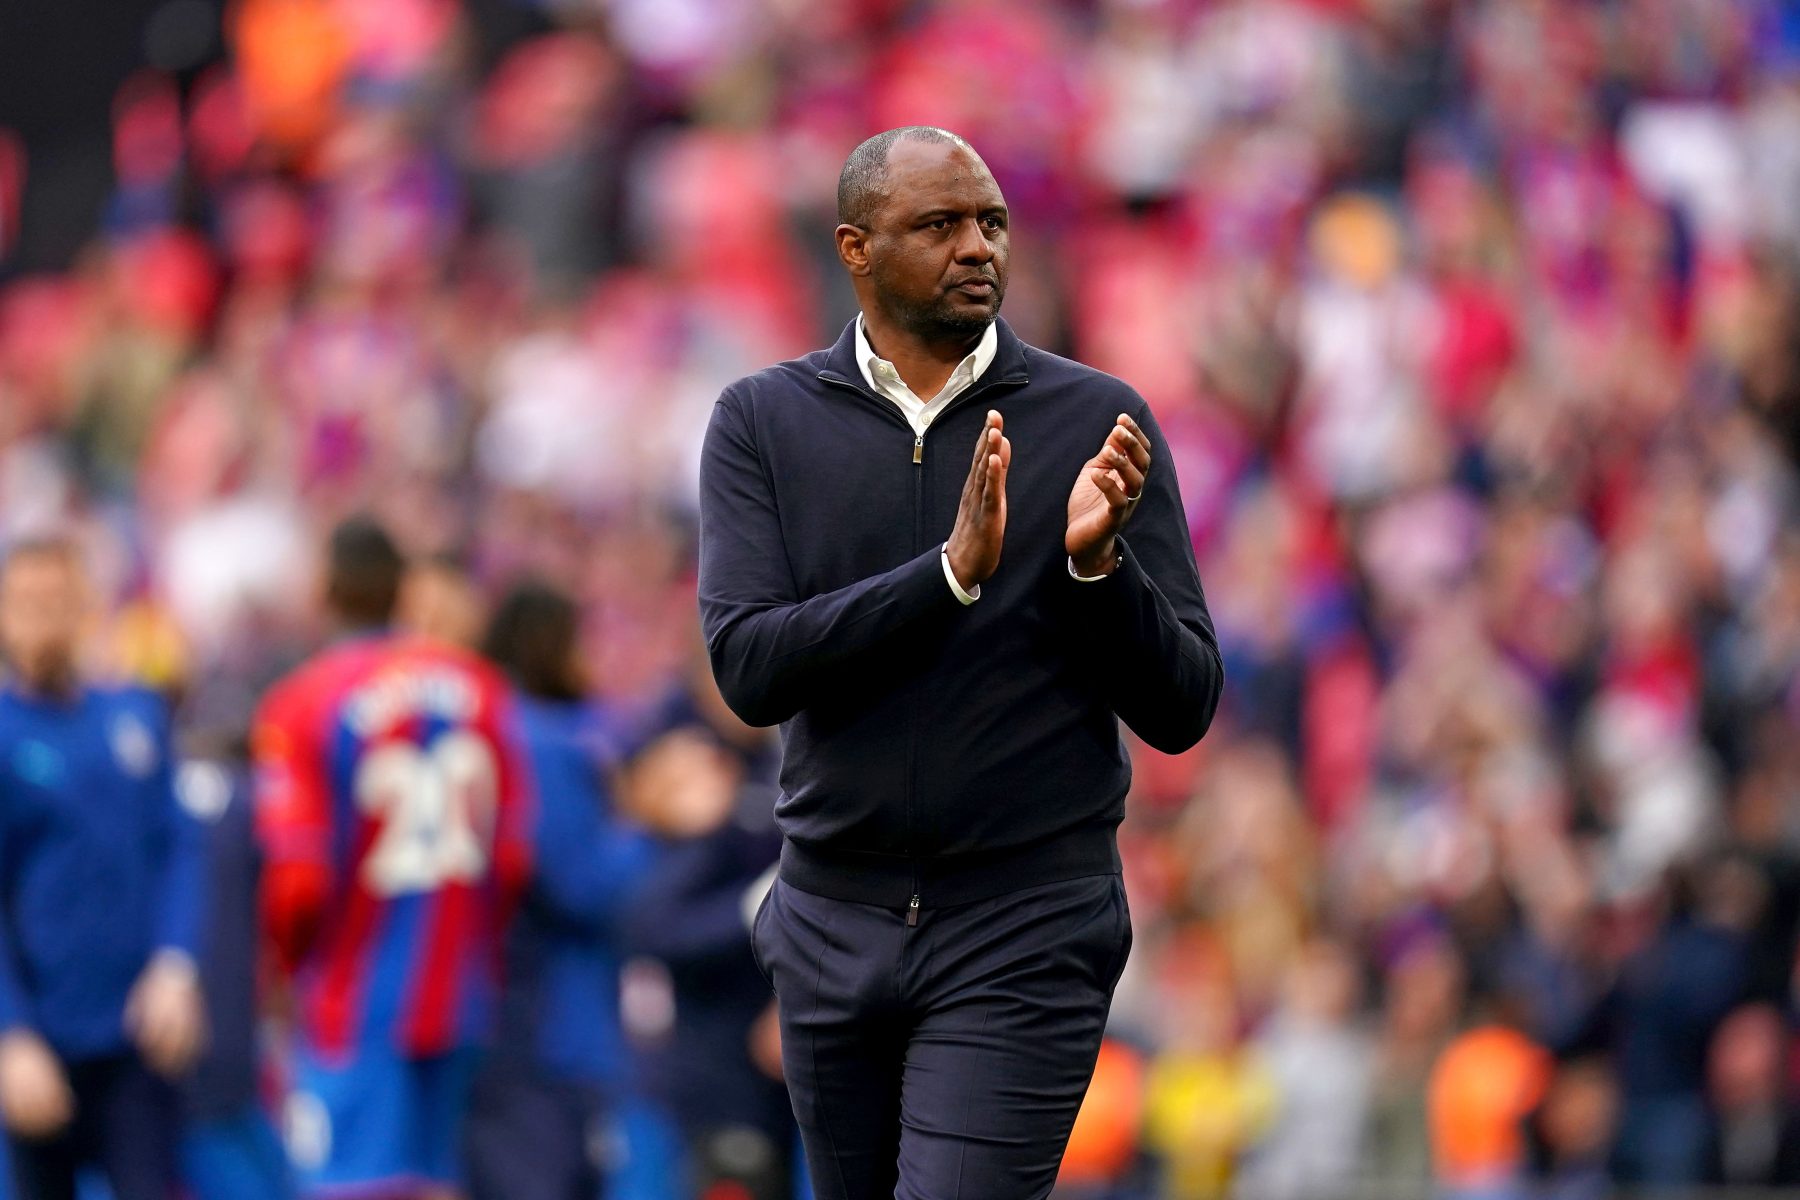 Patrick Vieira is appointed coach of Racing Club de Strasbourg Alsace